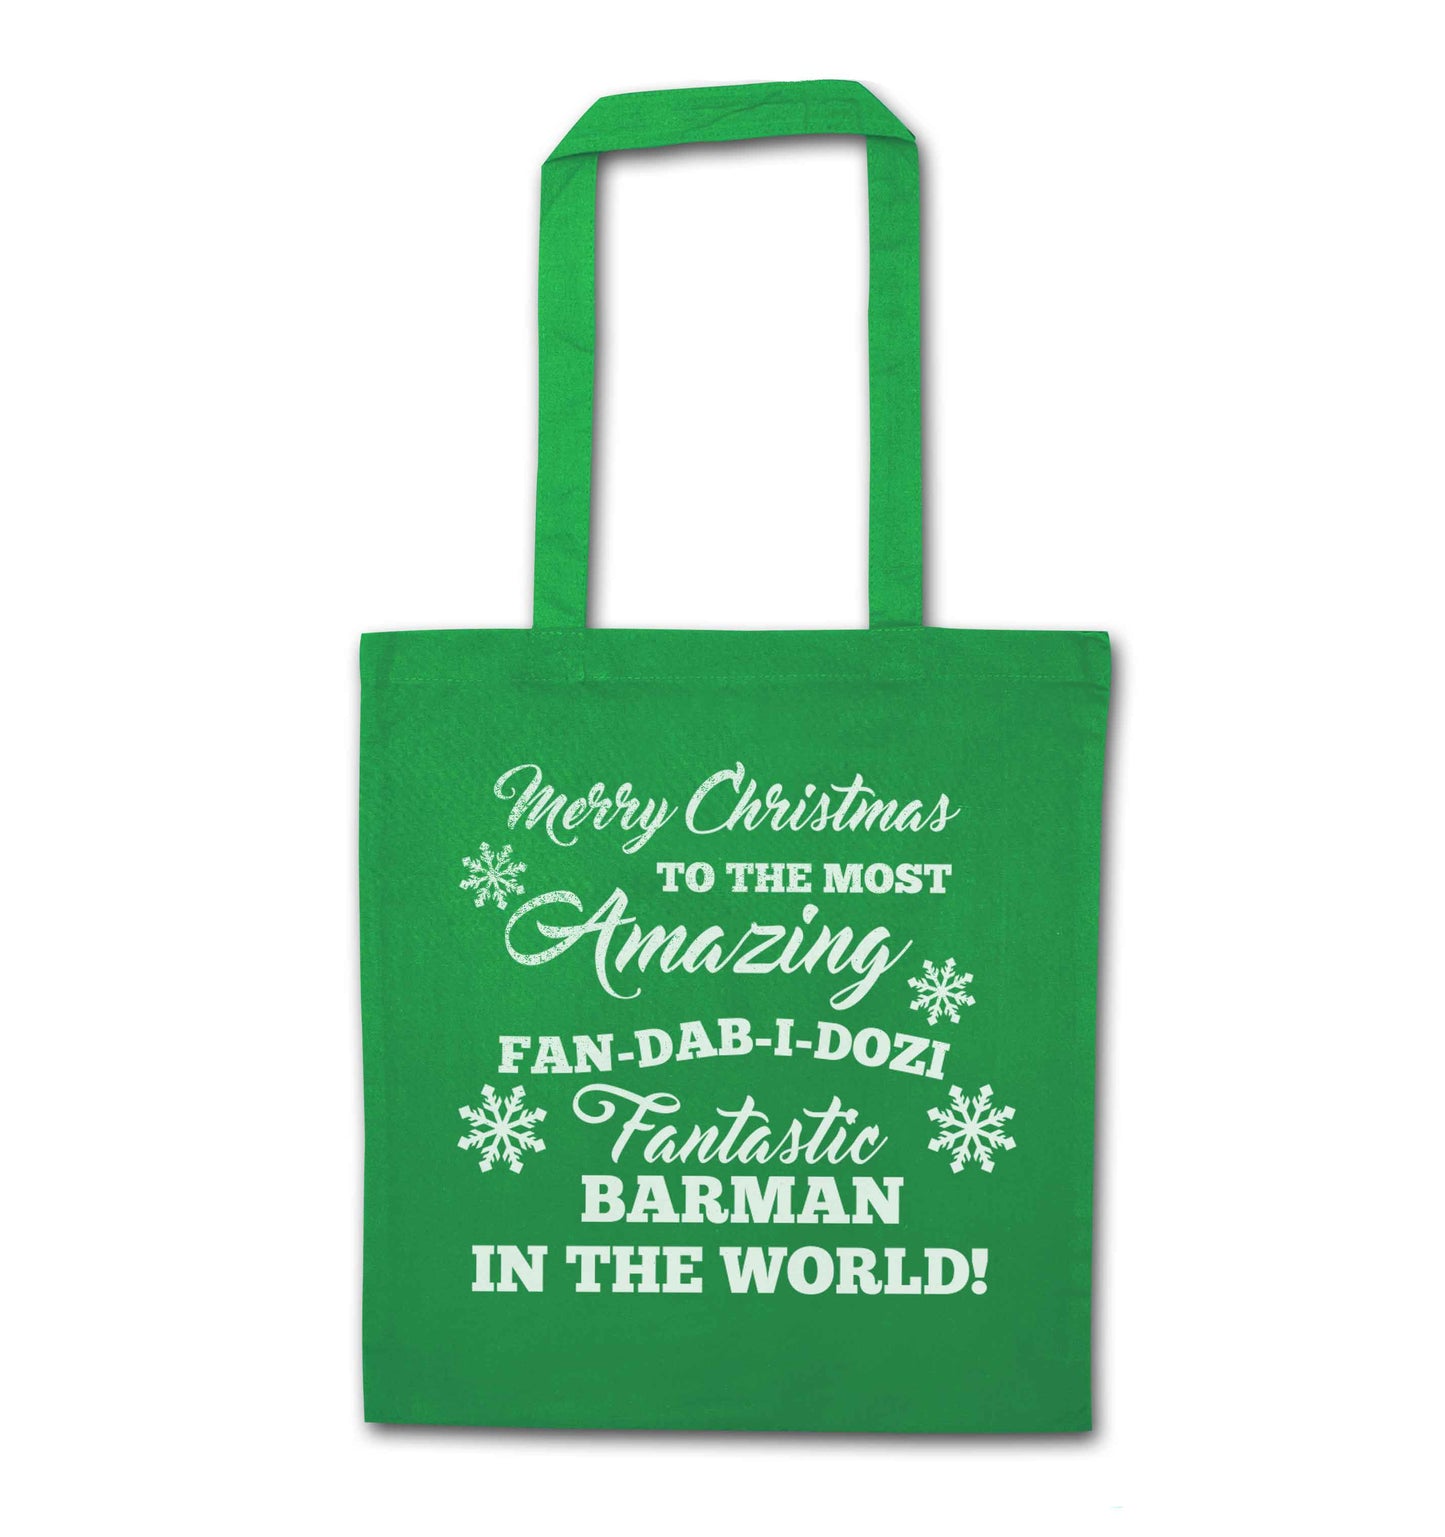 Merry Christmas to the most amazing barman in the world! green tote bag